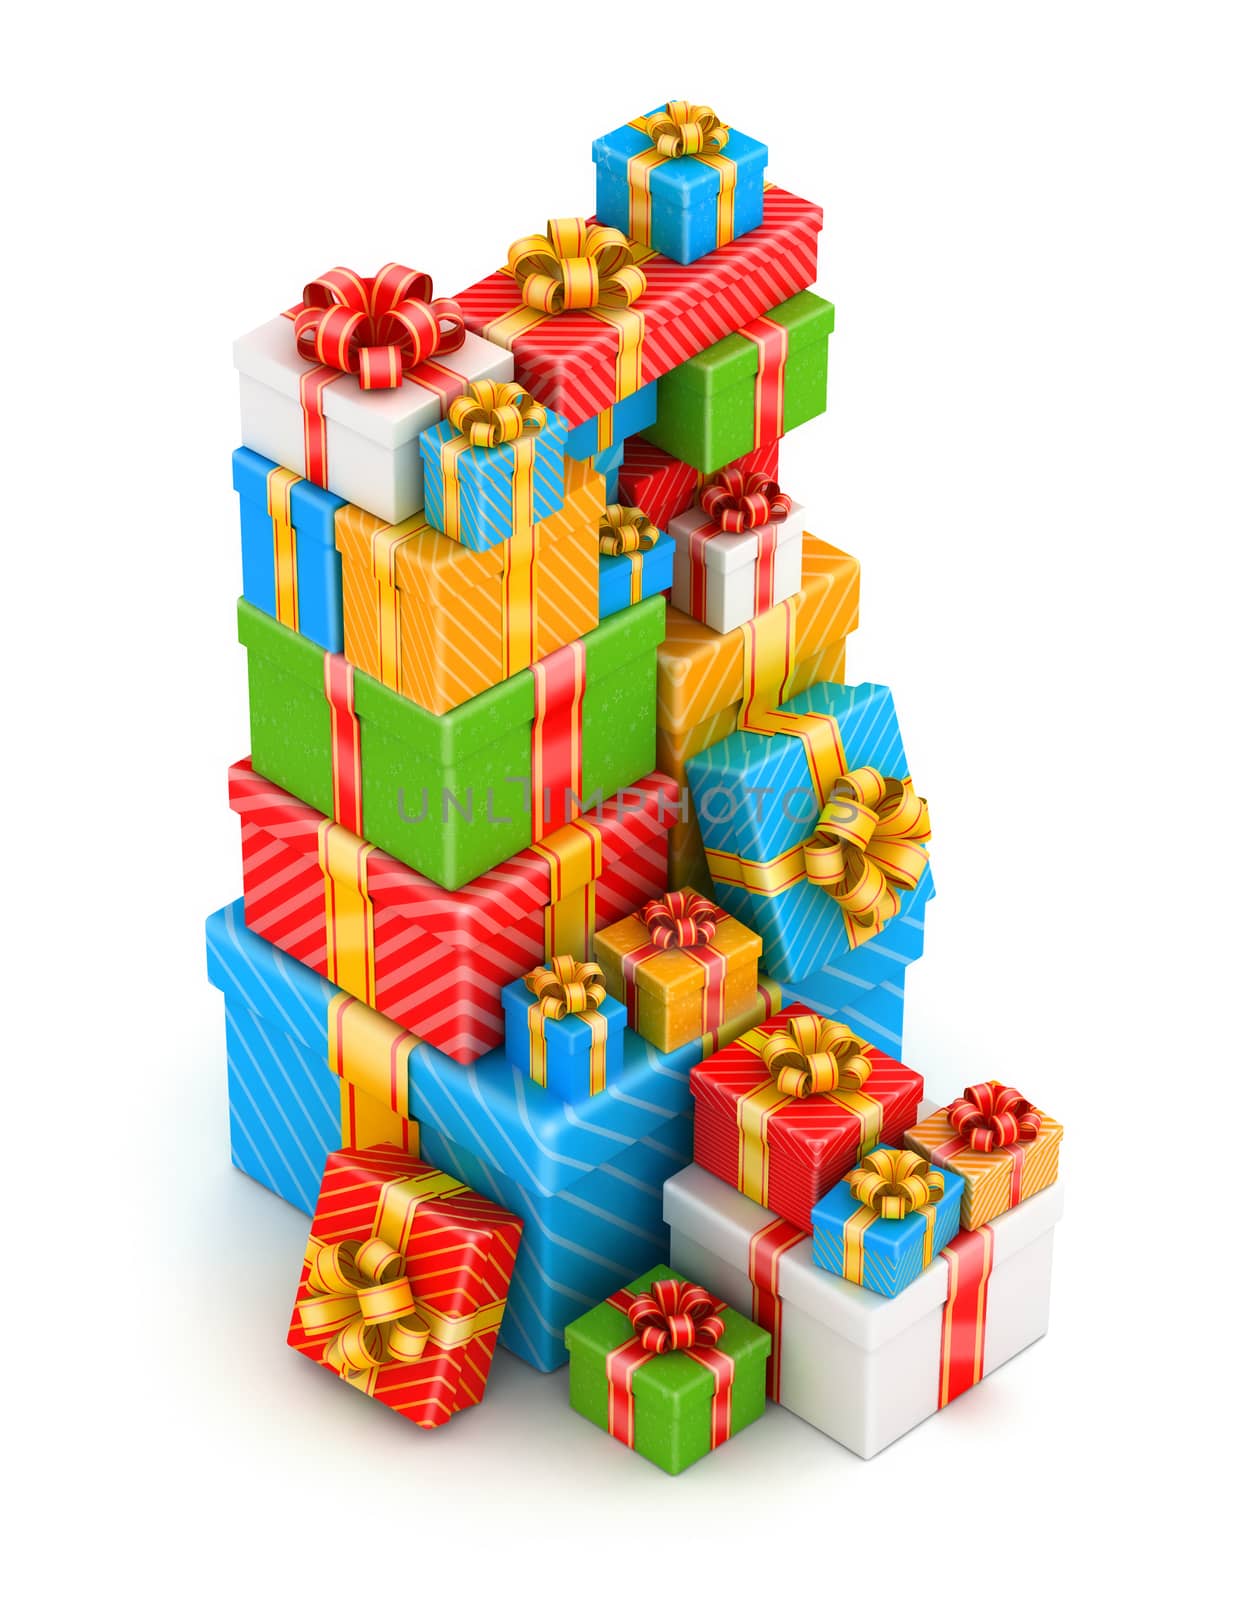 Tall stack of colored gift boxes on white background